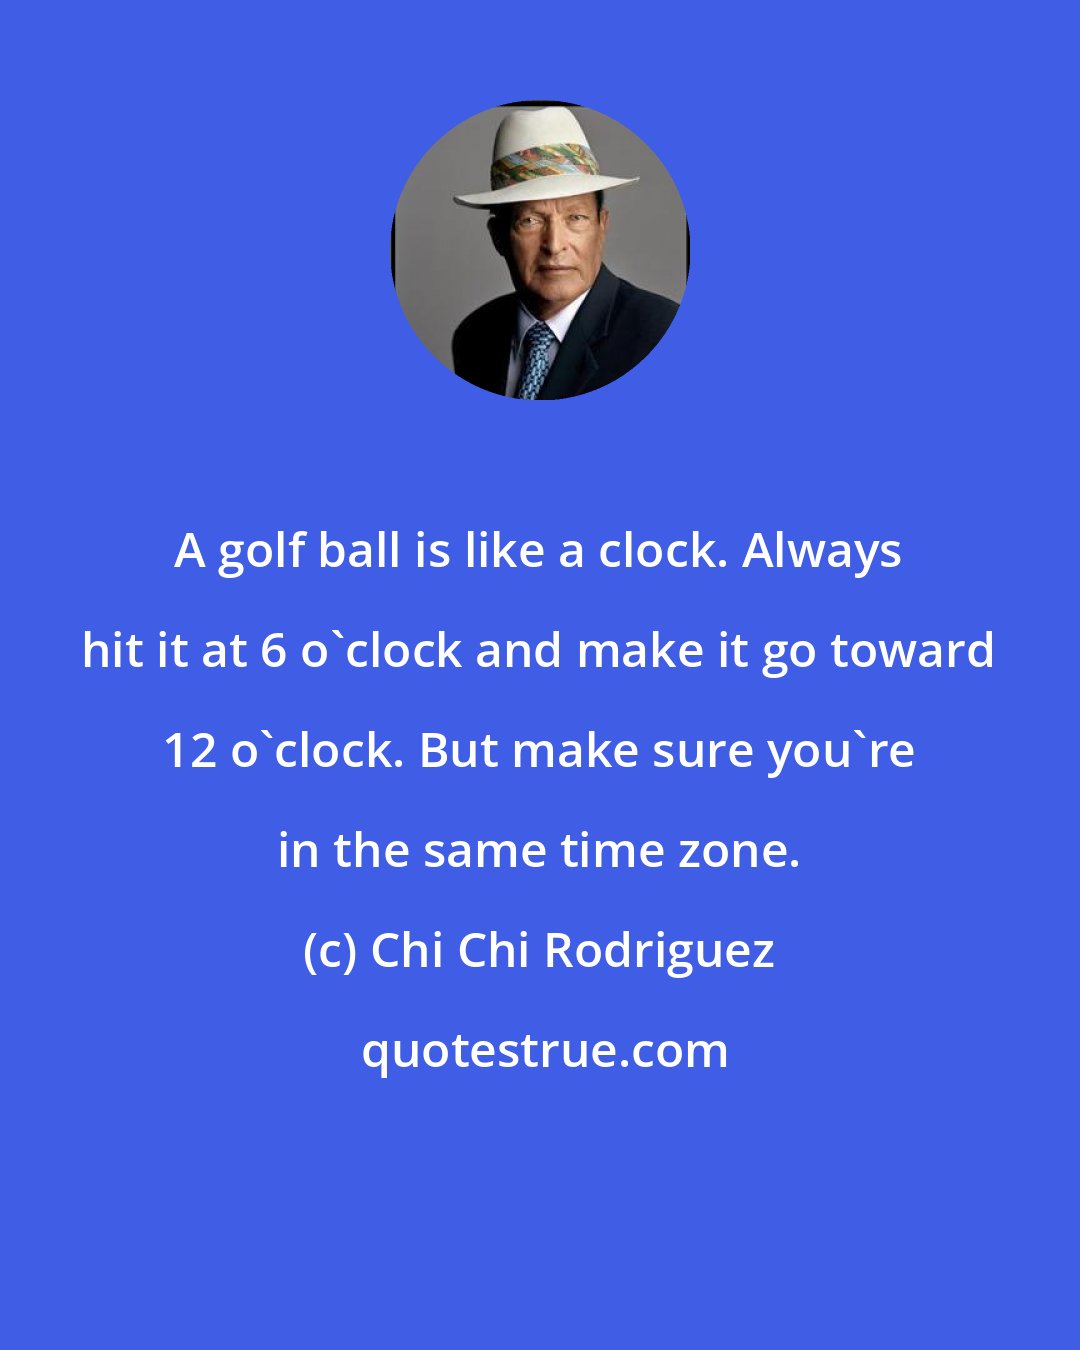 Chi Chi Rodriguez: A golf ball is like a clock. Always hit it at 6 o'clock and make it go toward 12 o'clock. But make sure you're in the same time zone.